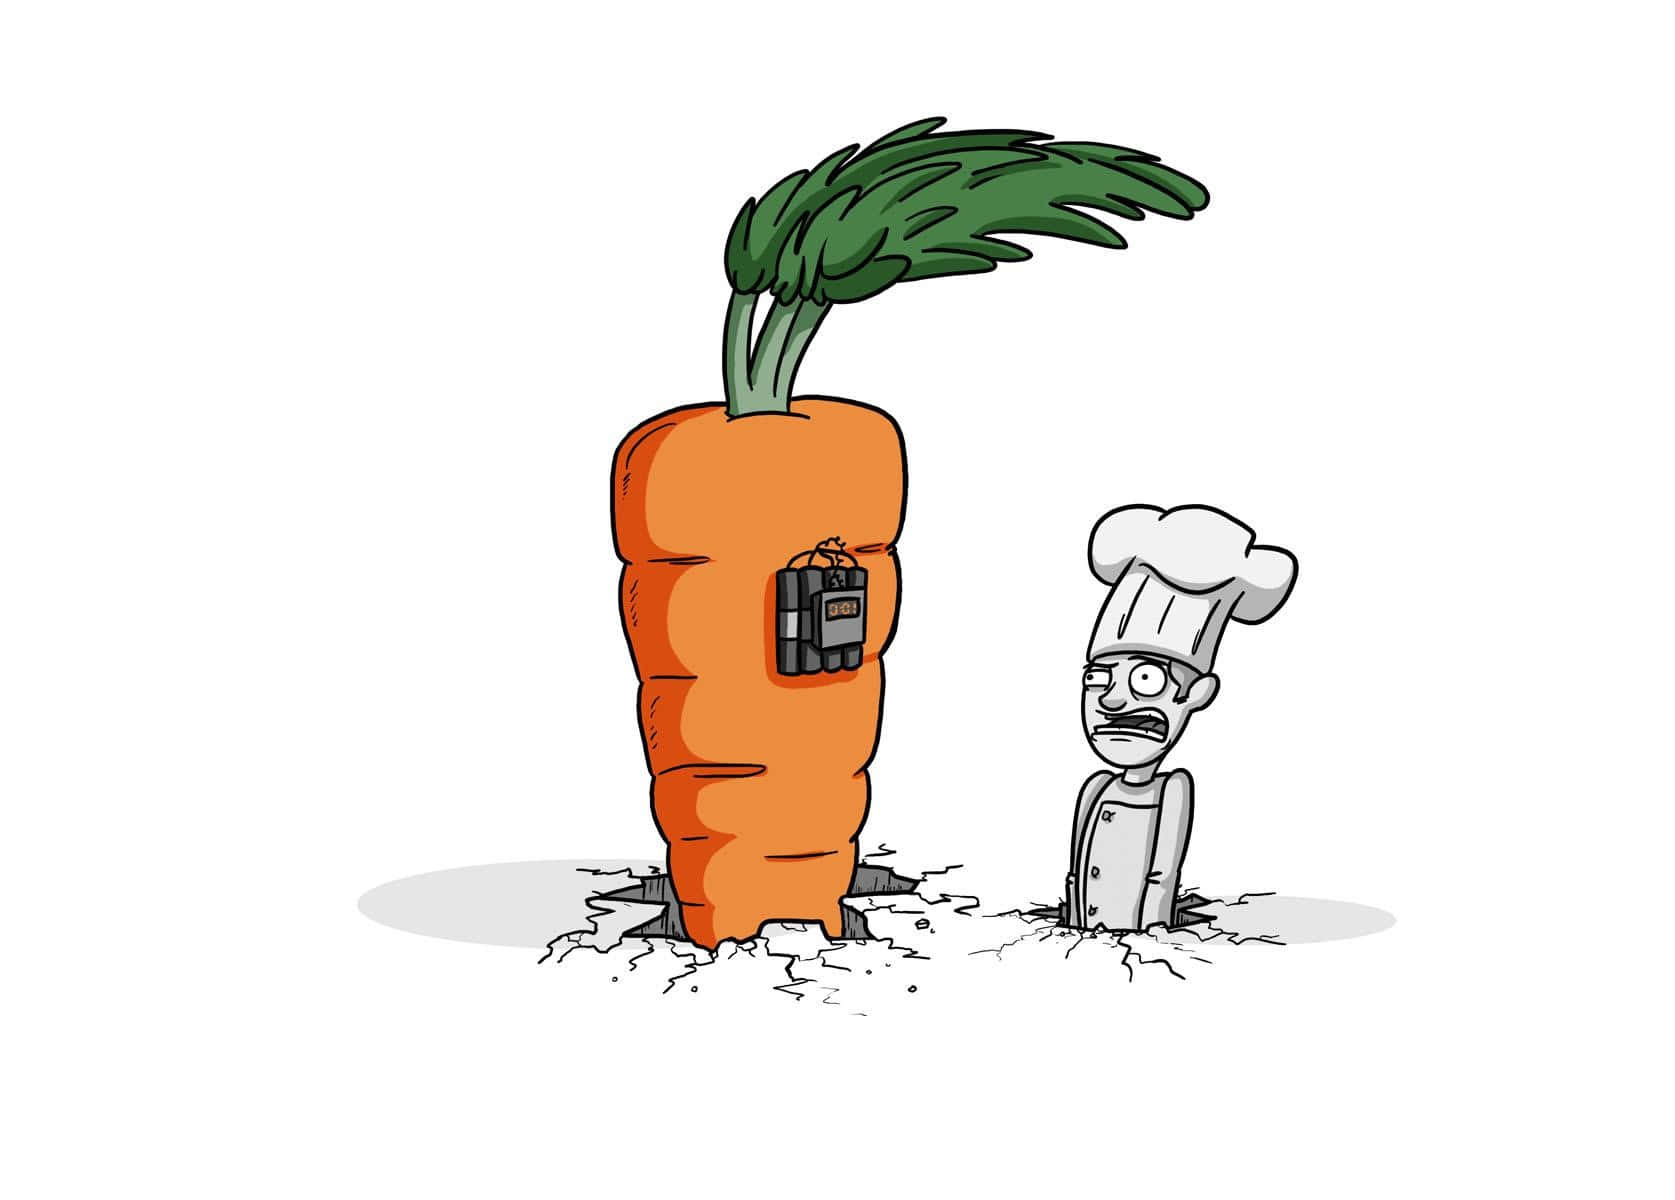 A Cartoon Character Is Standing Next To A Carrot